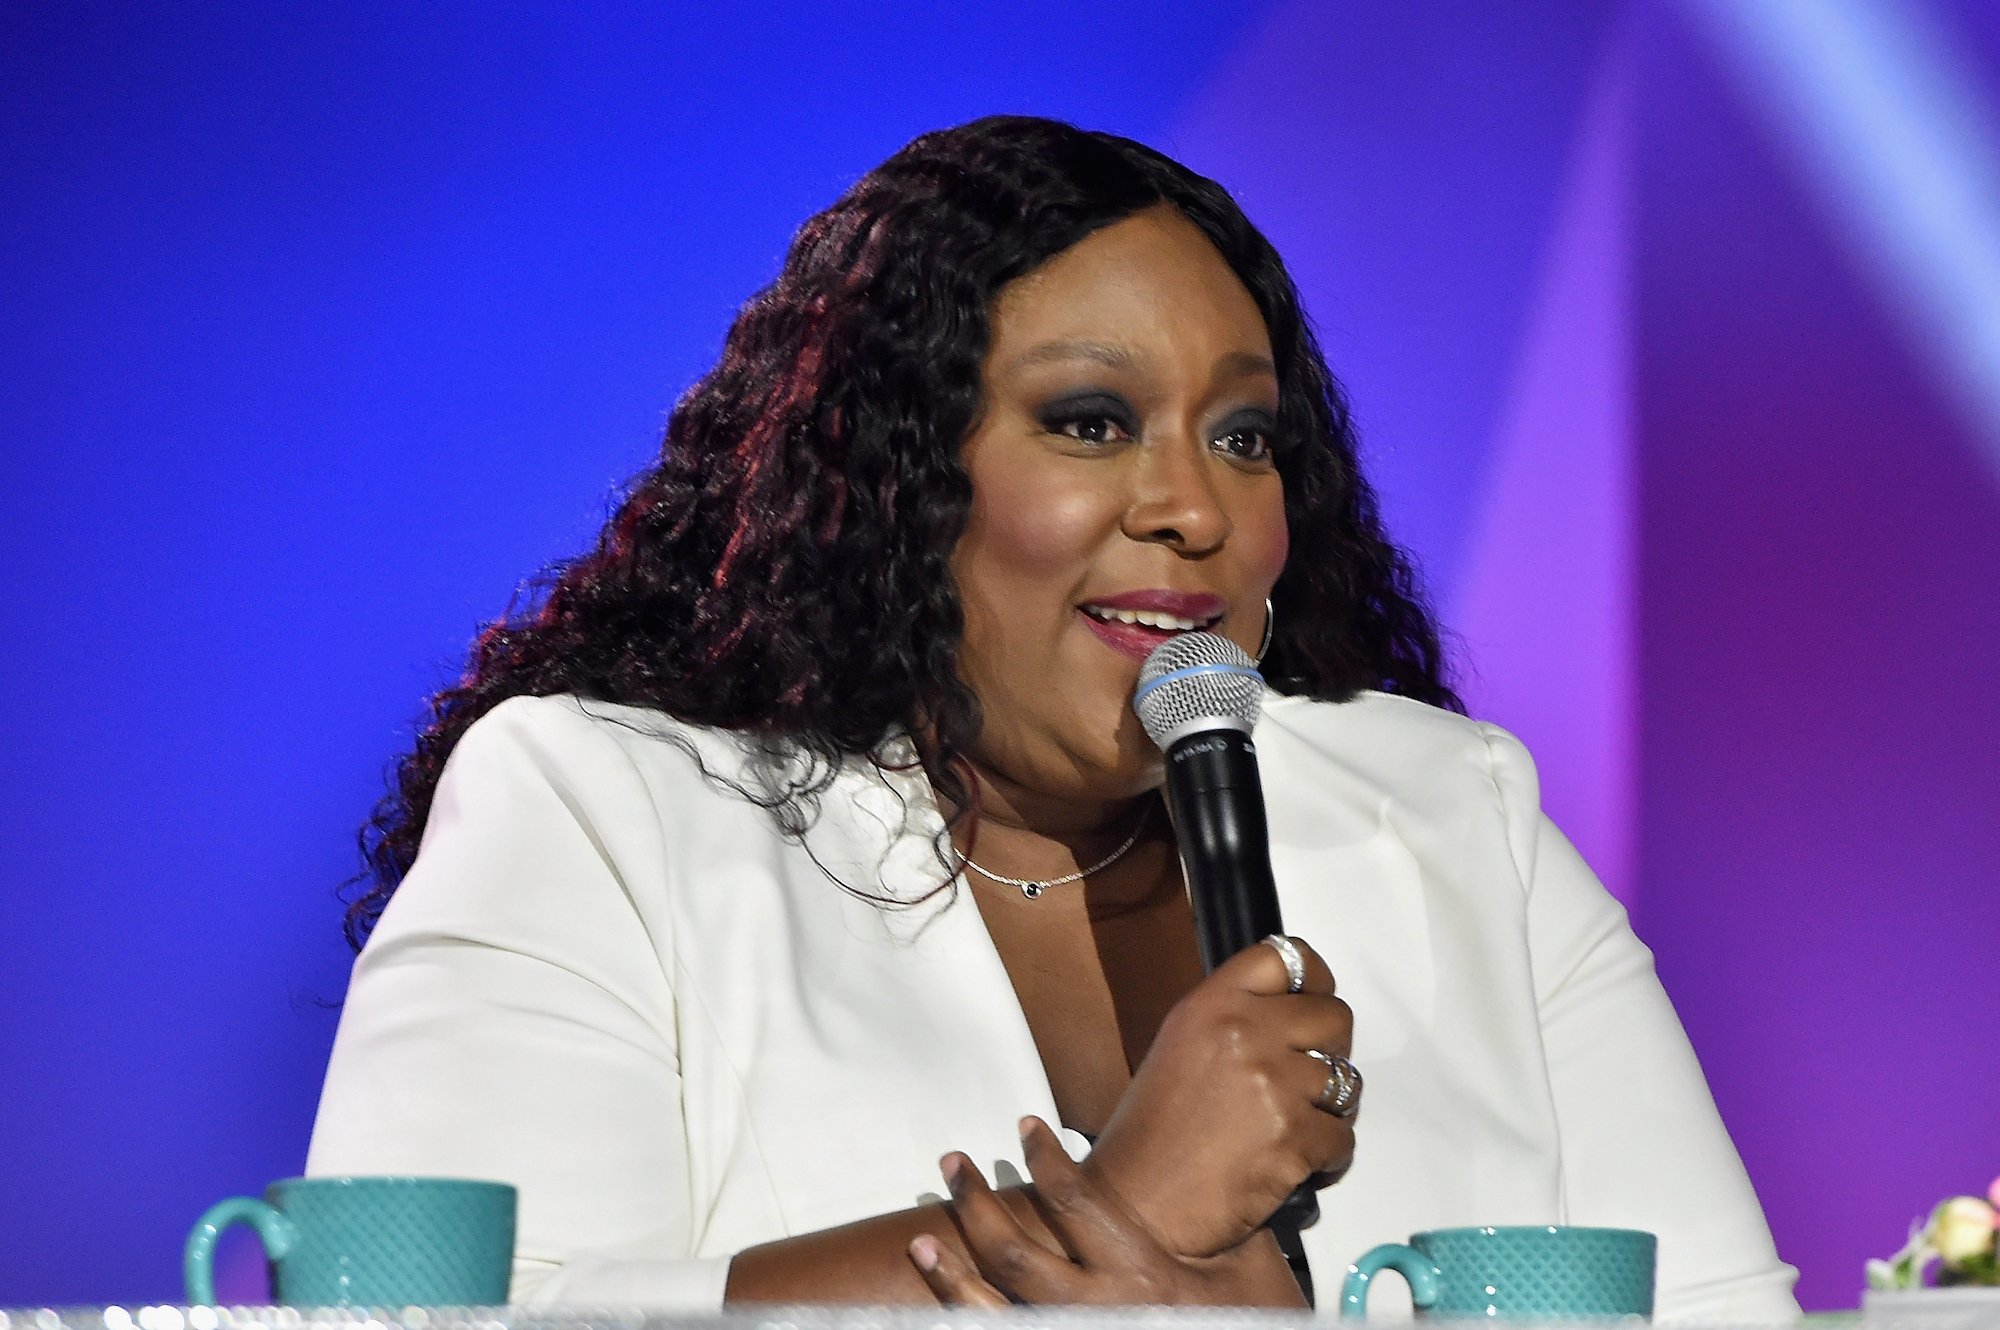 Loni Love holding a microphone and wearing a white blazer